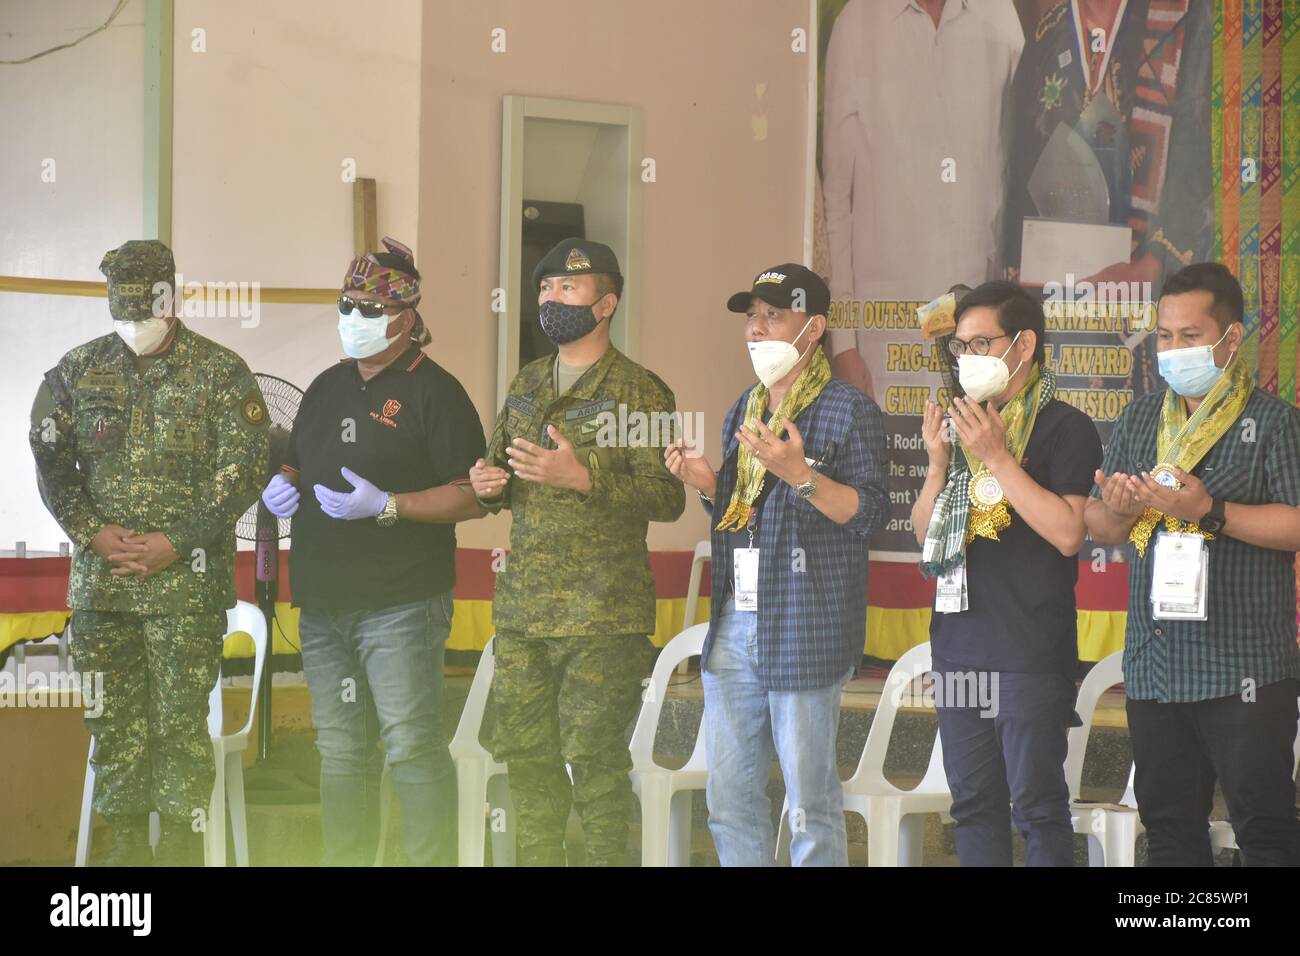 Bongao, Tawi-Tawi, Philippines. 21st July 2020. Ground breaking ceremony of the Bangsamoro governments.The 100 bed capacity Covid-19 isolation Center. Bangsamoro Inter Agency Task Force (BIATF) on Covid 19. Datu Halun Sakilan Memorial Hospital, Bongao, Tawi-Tawi, Philippines. Joining the Minister in a short program held at Datu Halun Sakilan Memorial Hospital were 2nd Marine Brigade Commander Col Chito G Rojas PN (M)(GSC) and 2MBDE DBC Col Nestor E Narag PN (M)(GSC), Governor Yshamael I. Sali, Vice-Governor Michail K. Ahaja and Dr. Sangkula G. Laja. Credit: Pacific Press Agency/Alamy Live News Stock Photo